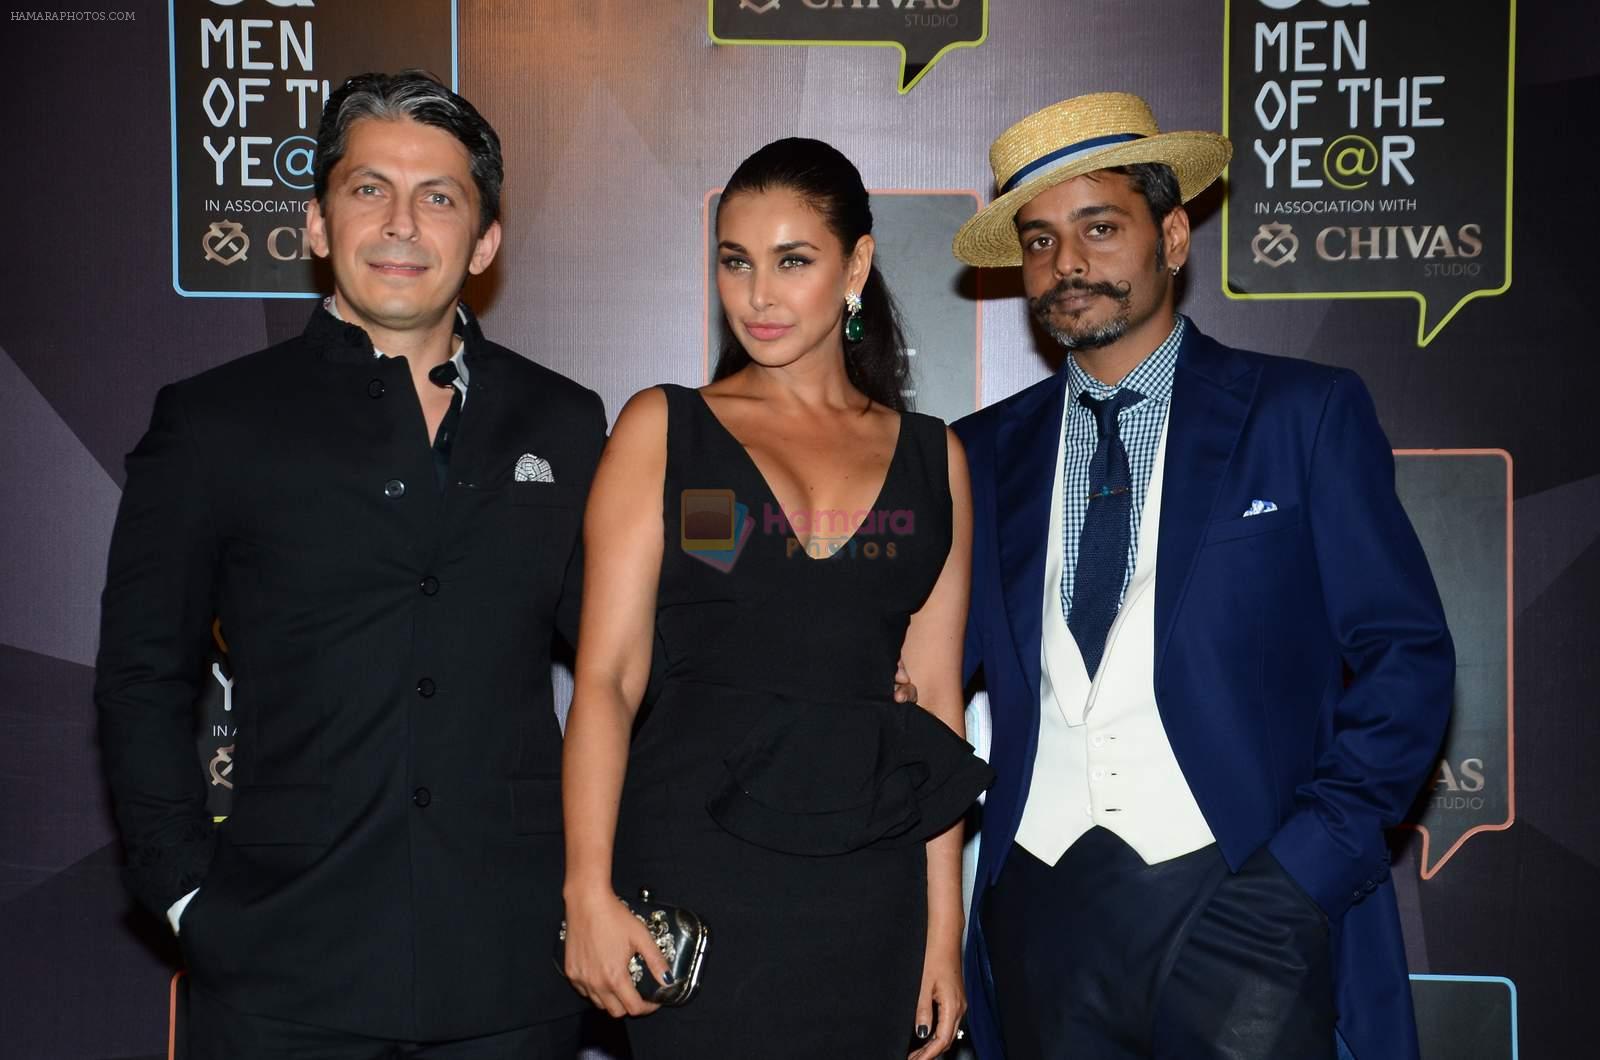 Lisa Ray at GQ men of the year 2015 on 26th Sept 2015